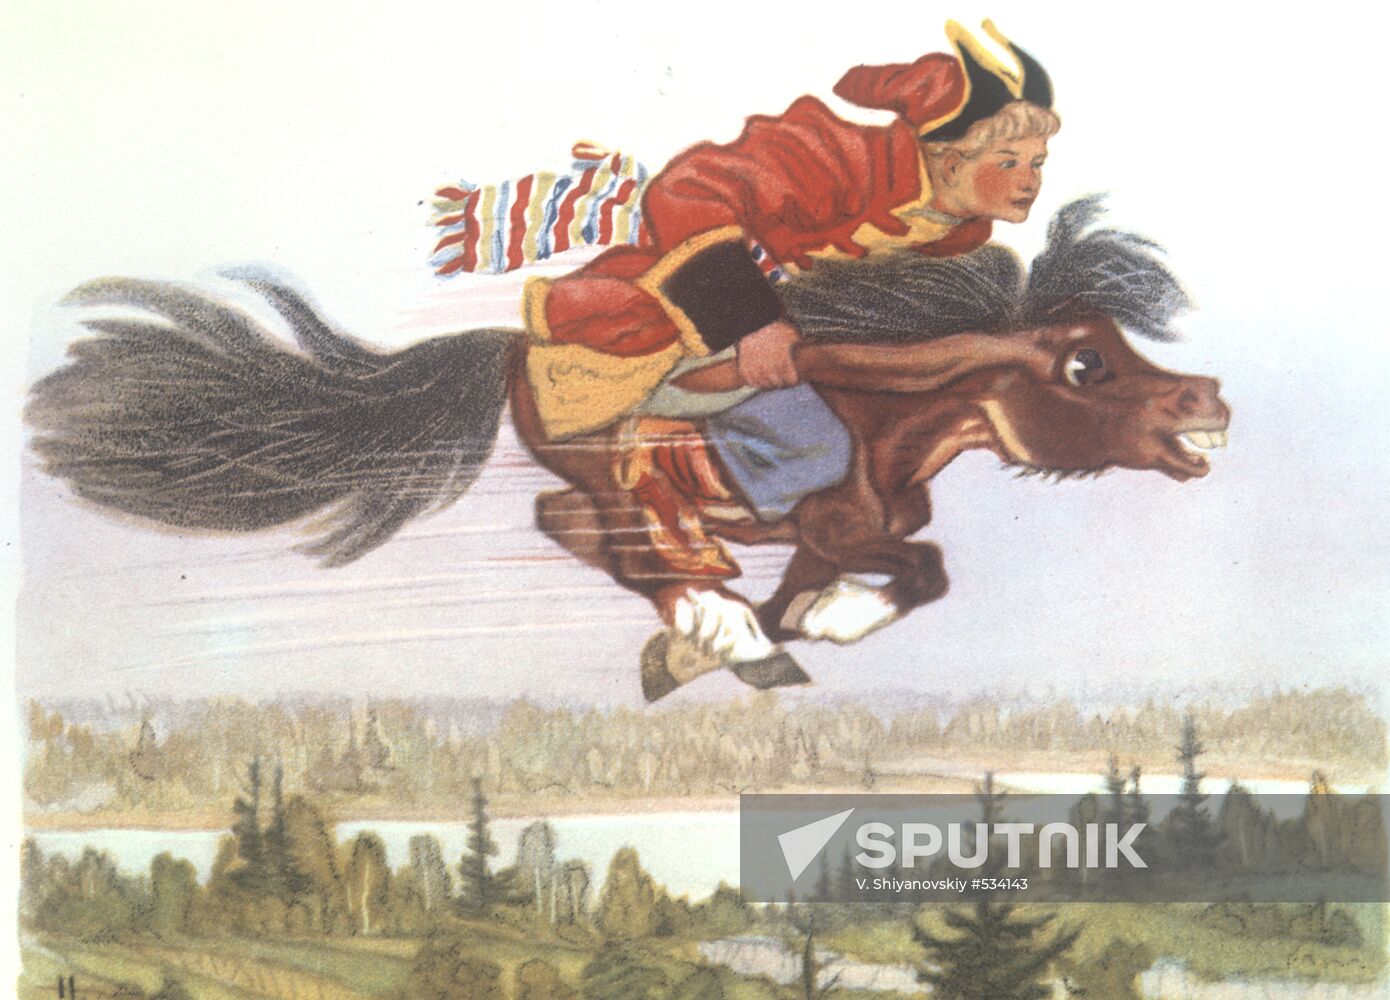 Illustration for "The Humpbacked Horse" fairy tale